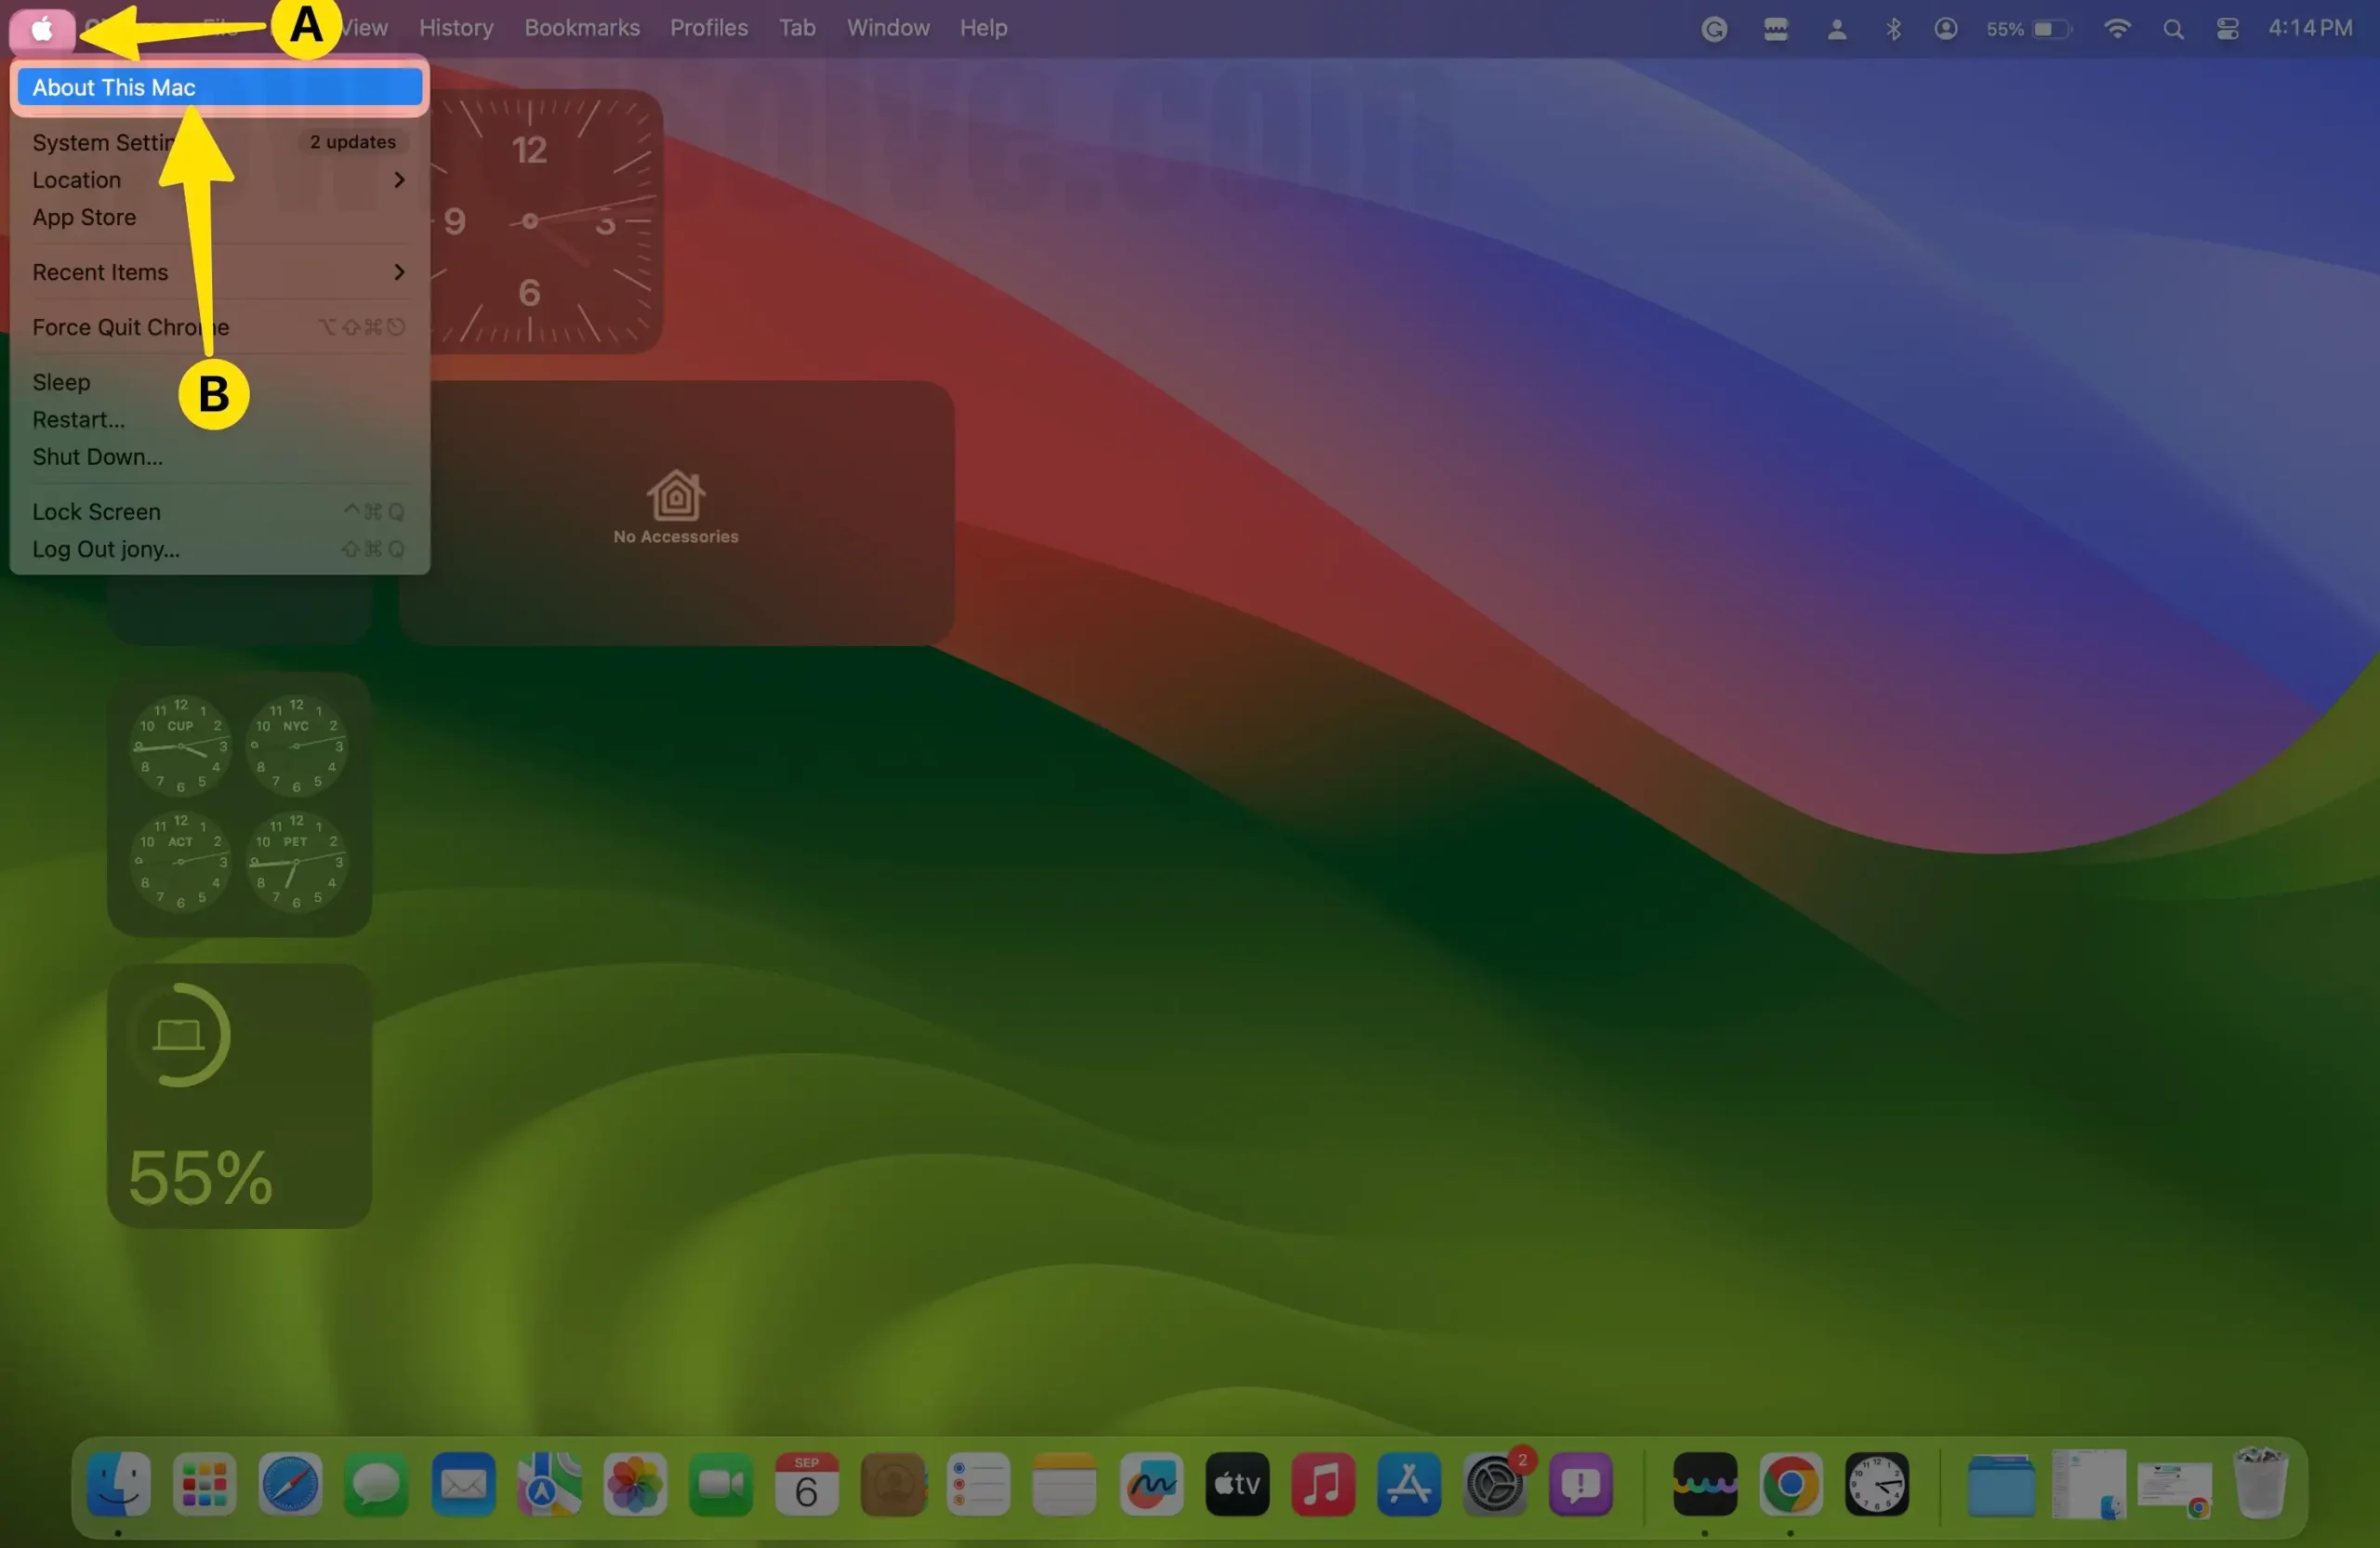 Open About this Mac in Apple logo at top left corner